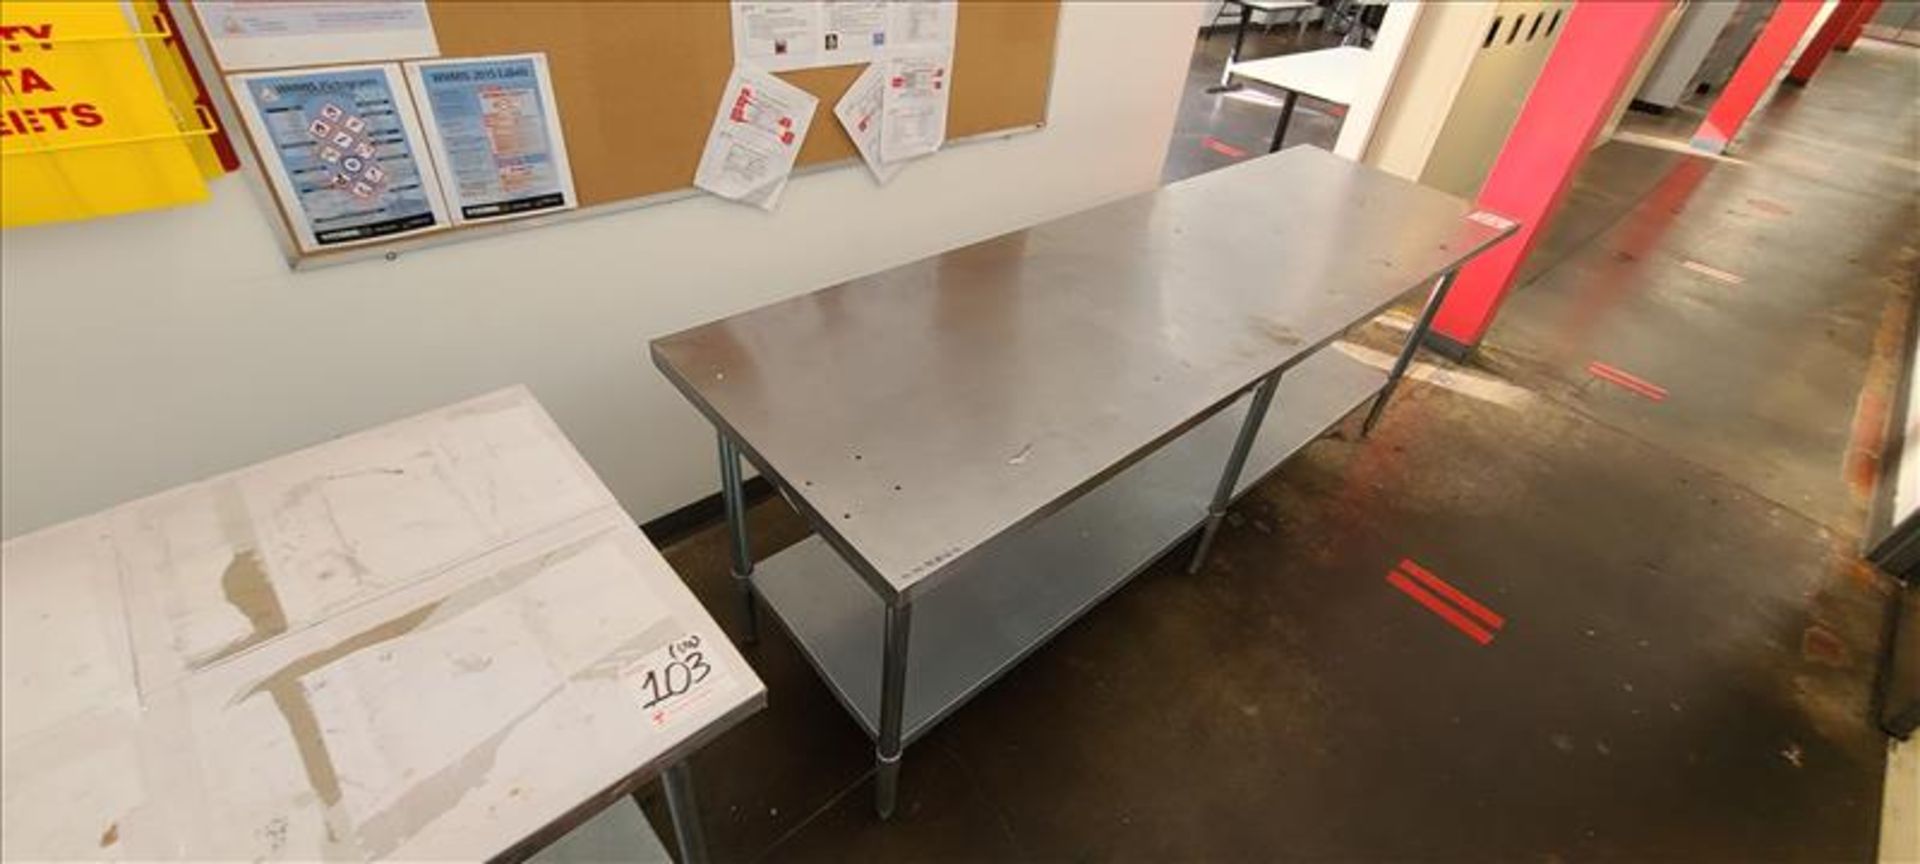 s/s Worktables, 96 in. x 30 in. - Image 3 of 3